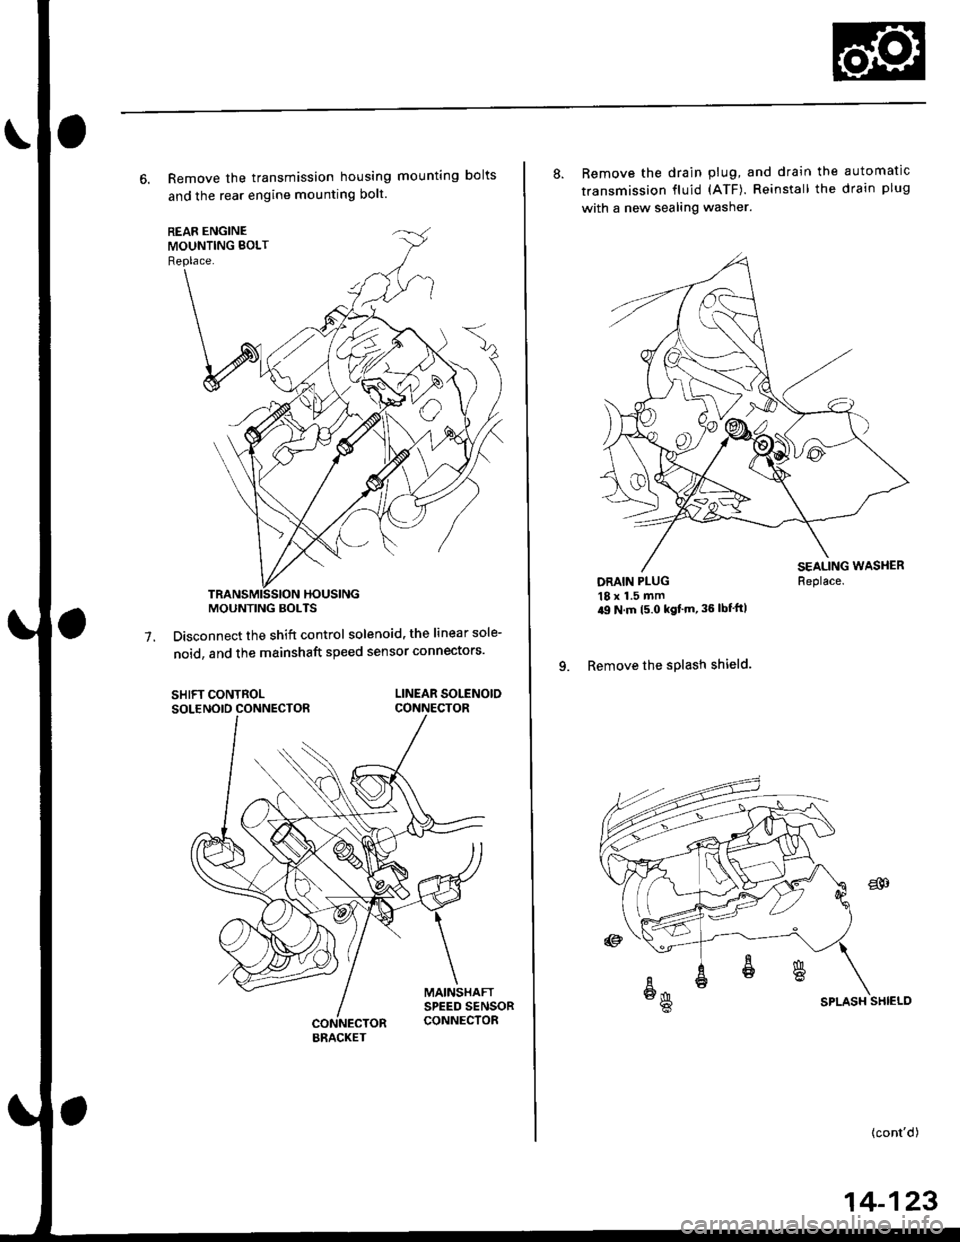 HONDA CIVIC 2000 6.G Workshop Manual 6. Remove the transmission housing mounting bolts
and the rear engine mounting bolt.
Disconnect the shift control solenoid, the linear sole-
noid, and the mainshaft speed sensor connectors7.
SHIFT CO